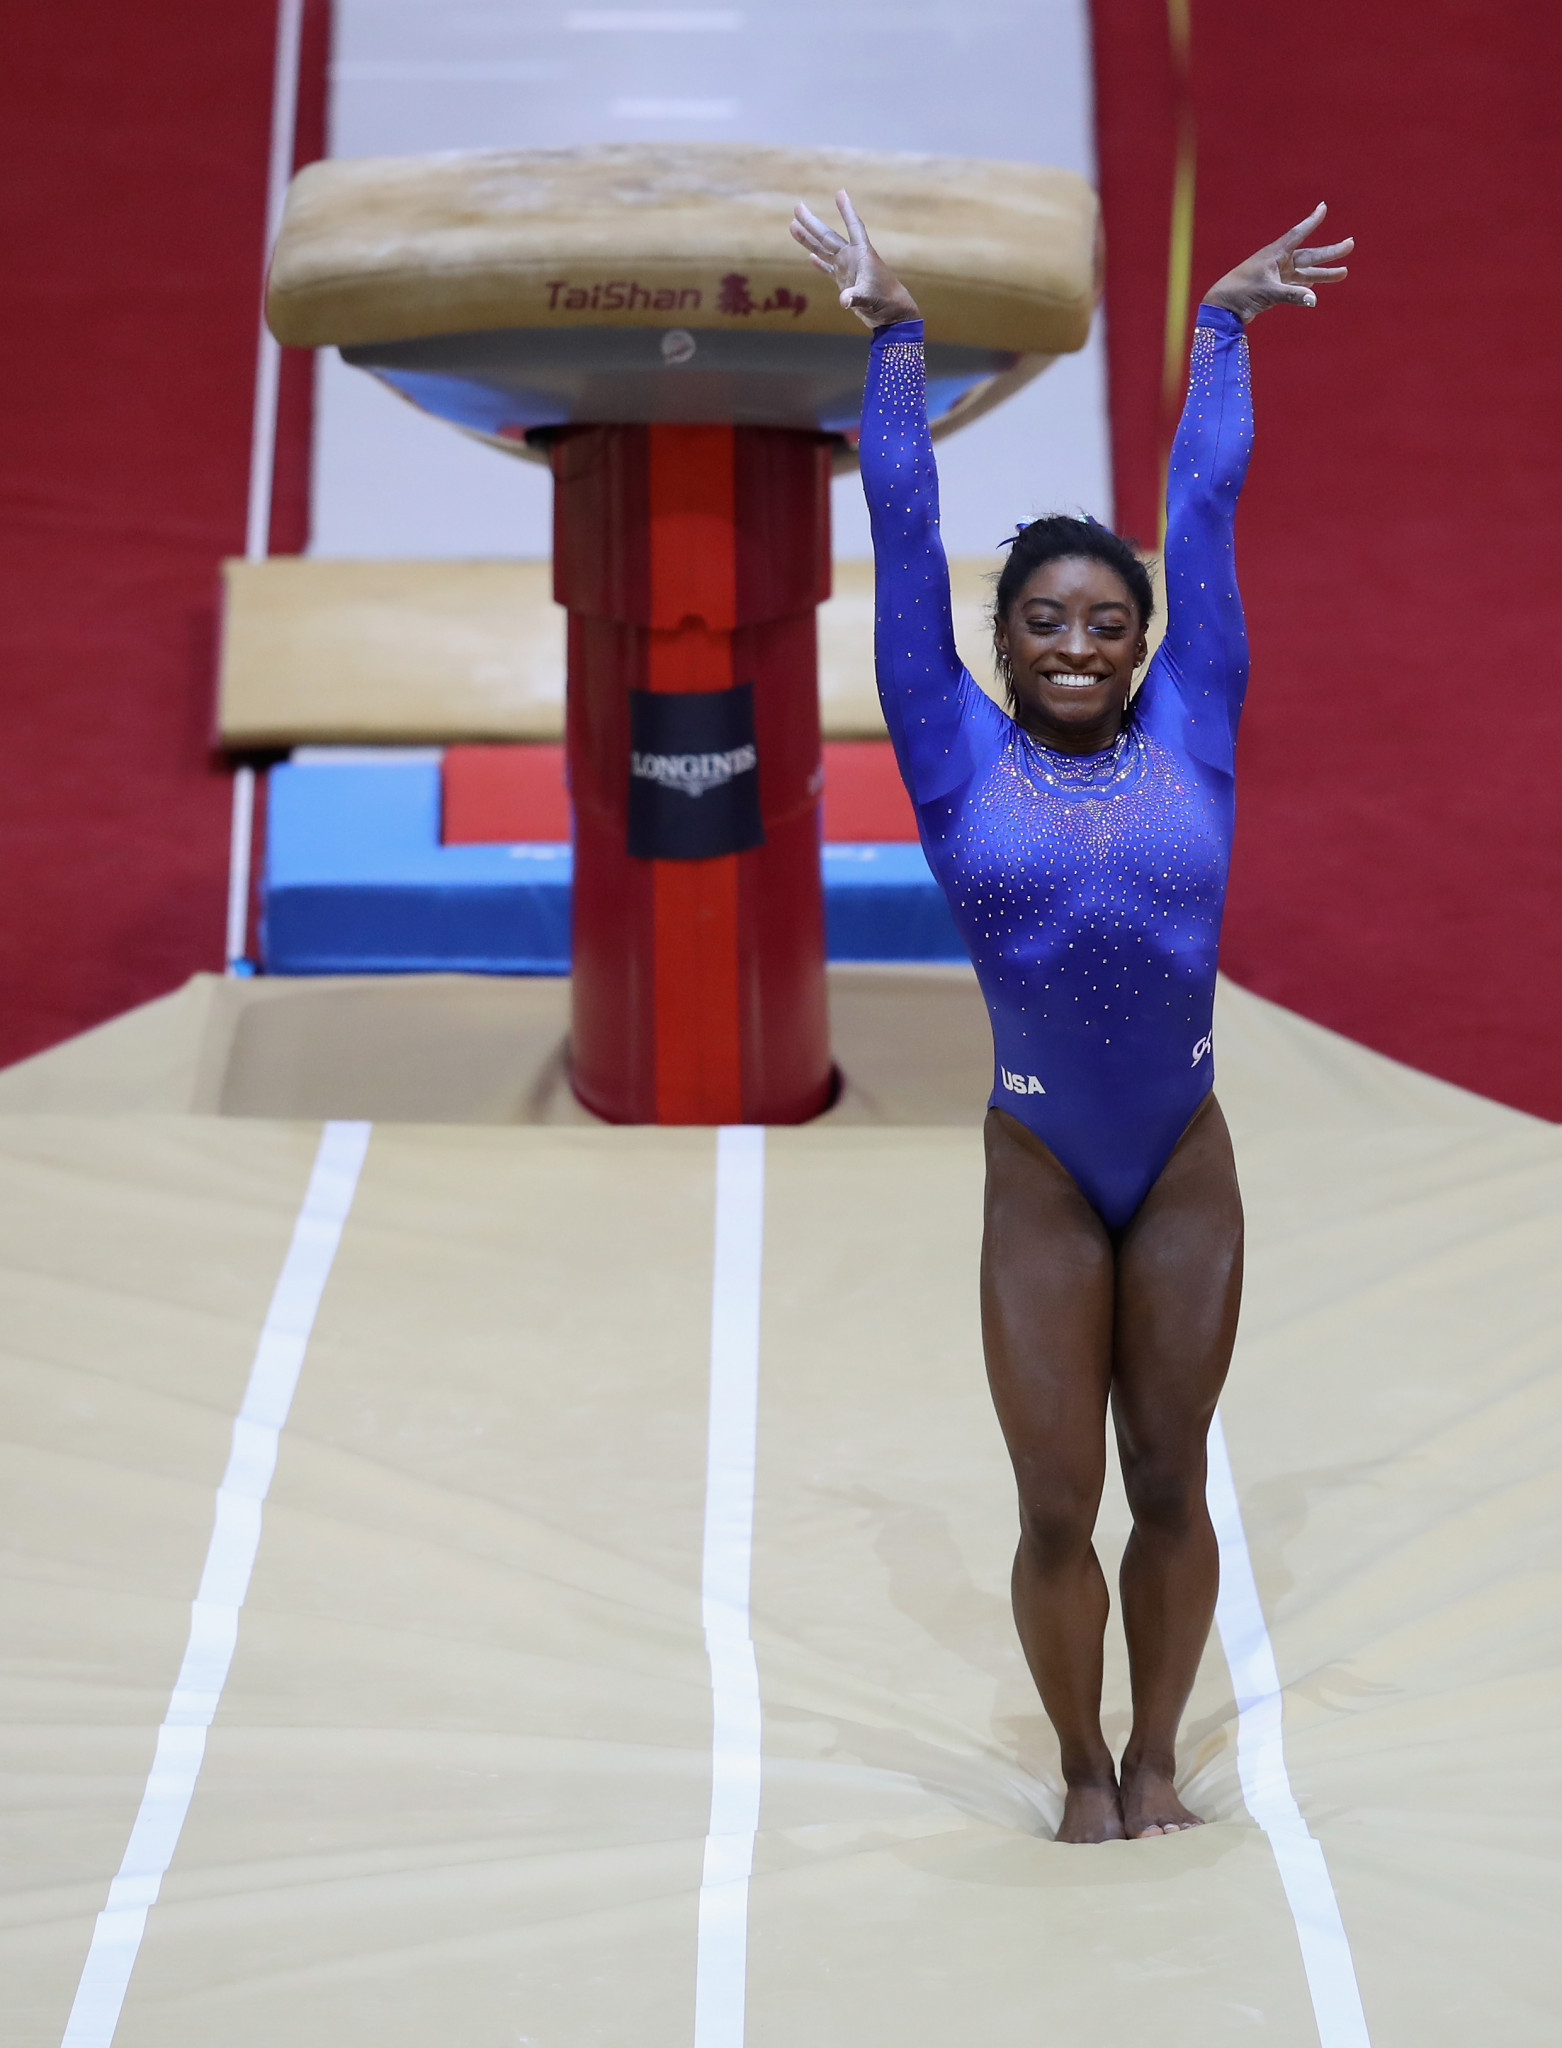 Simone Biles introduced a new move on vault  ©Getty Images